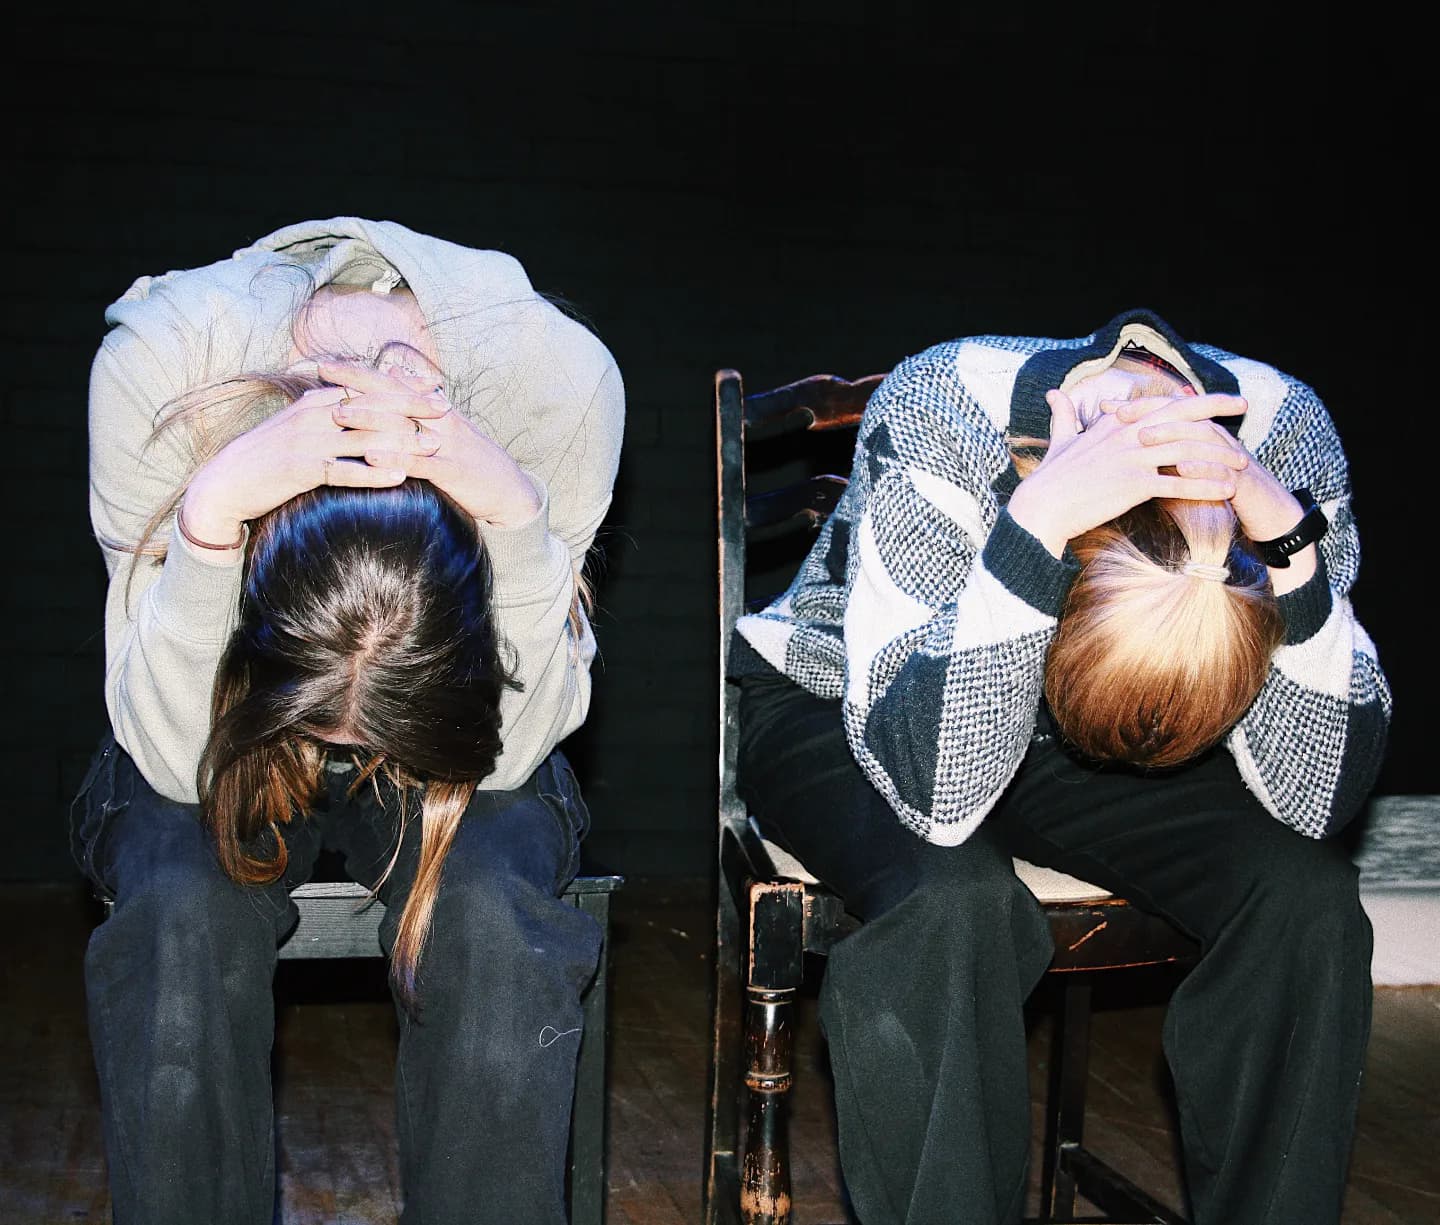 Two women sit side by side on chairs with their heads down and their hands on the backs of their necks